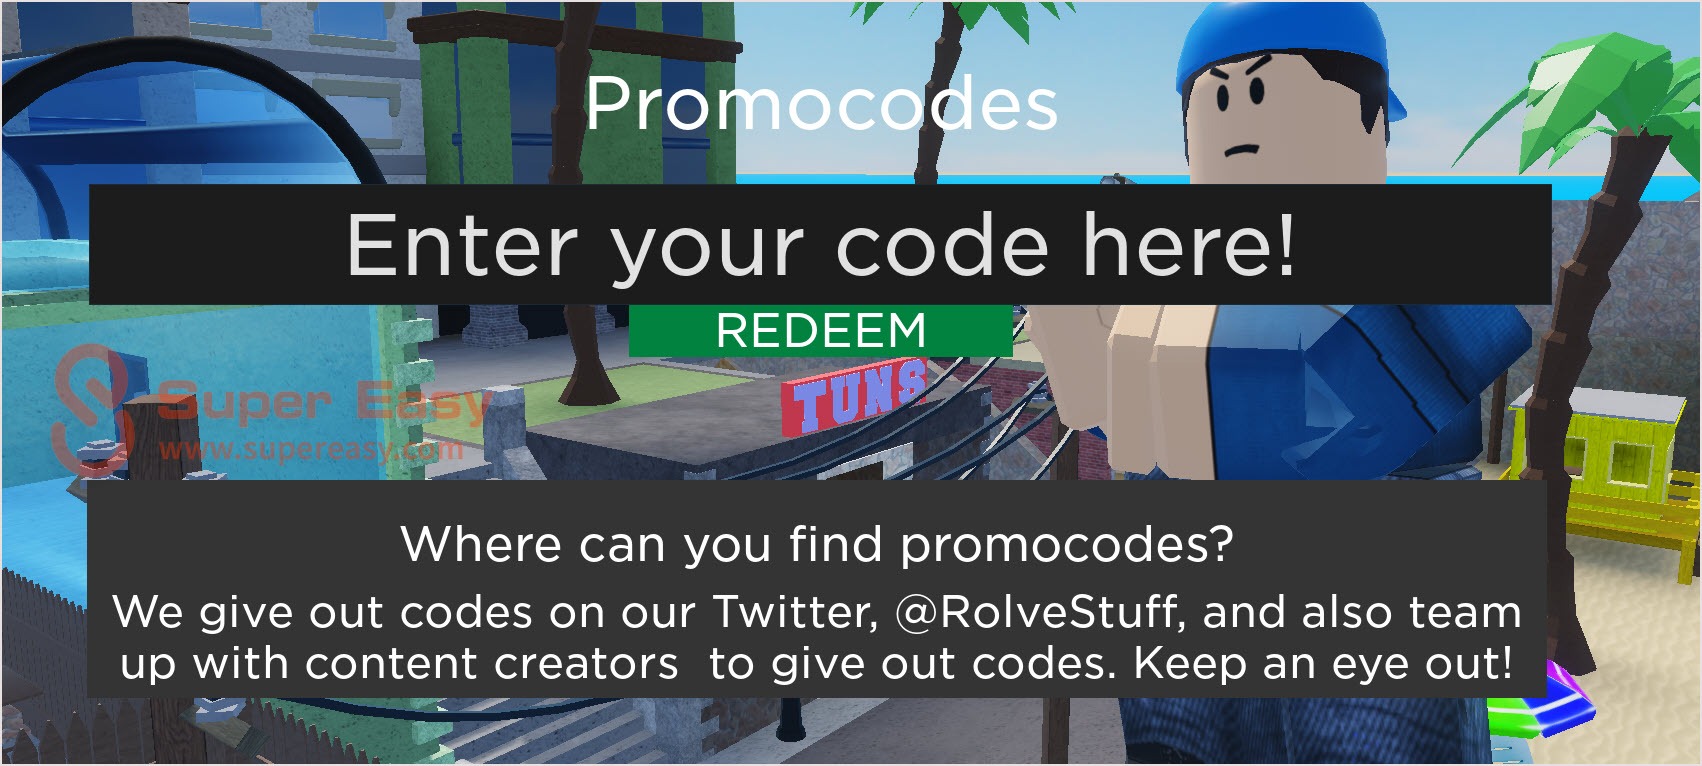 New Roblox Arsenal All Working Codes July 2021 Super Easy - twitter codes for arsenal roblox